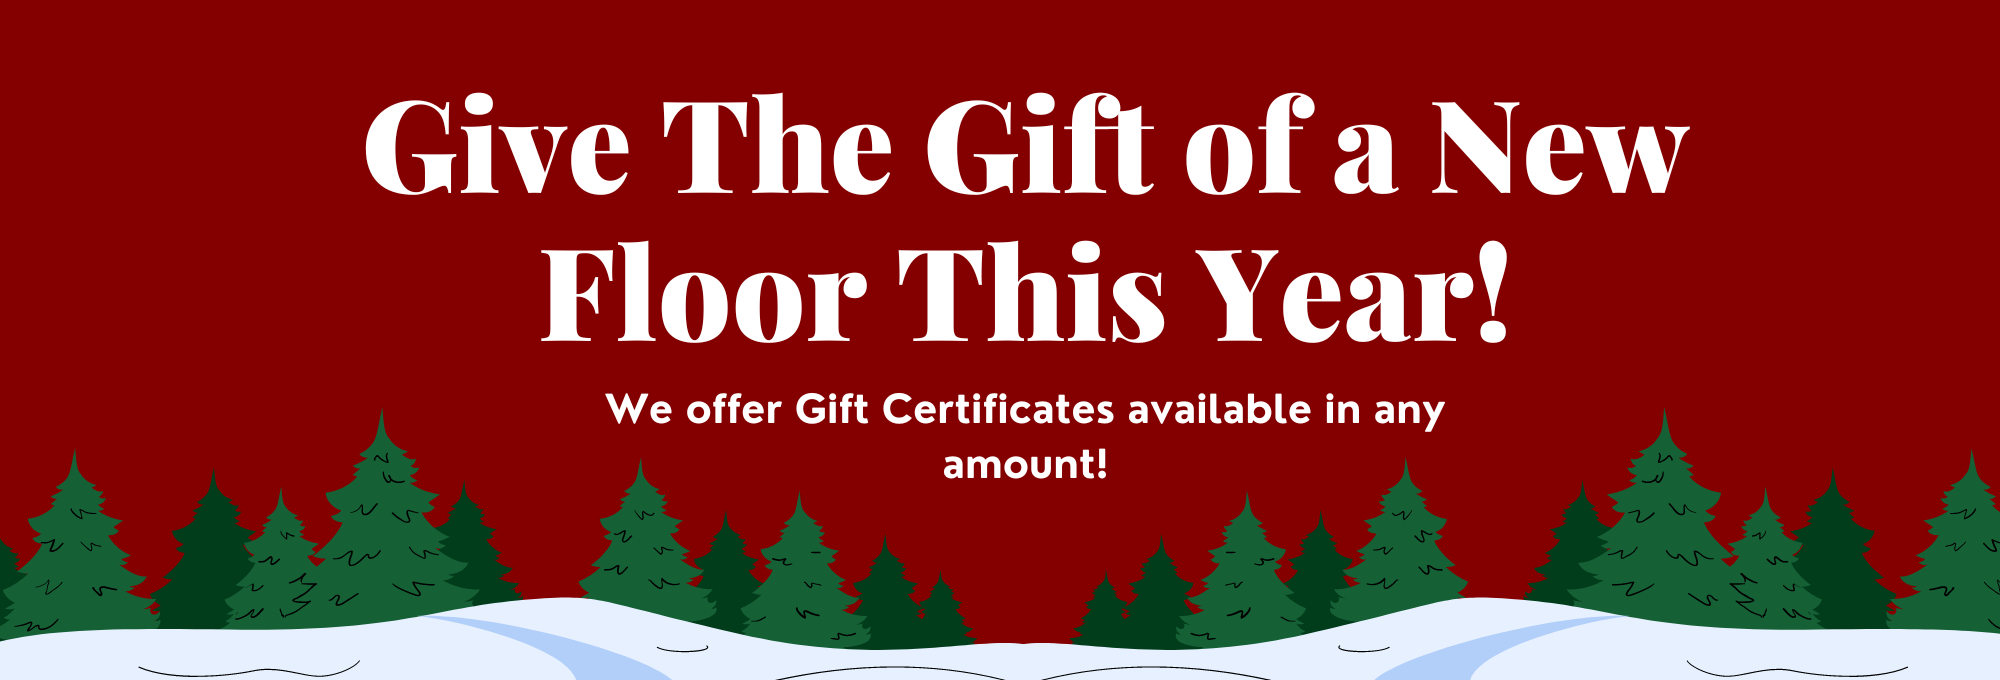 Give The Gift of a New Floor This Year!